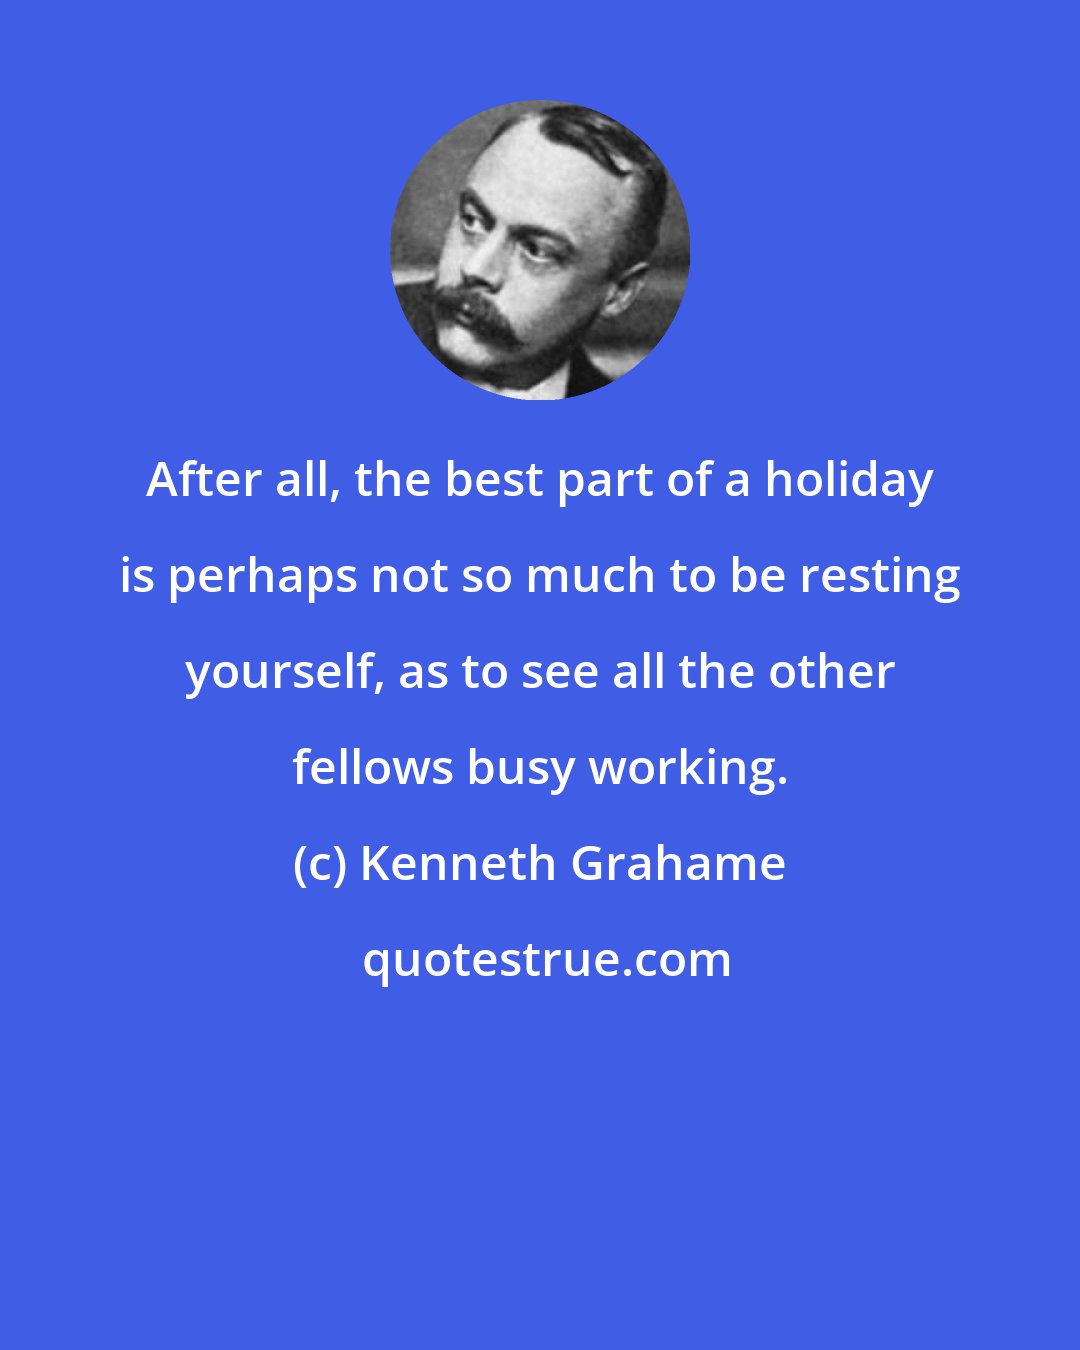 Kenneth Grahame: After all, the best part of a holiday is perhaps not so much to be resting yourself, as to see all the other fellows busy working.